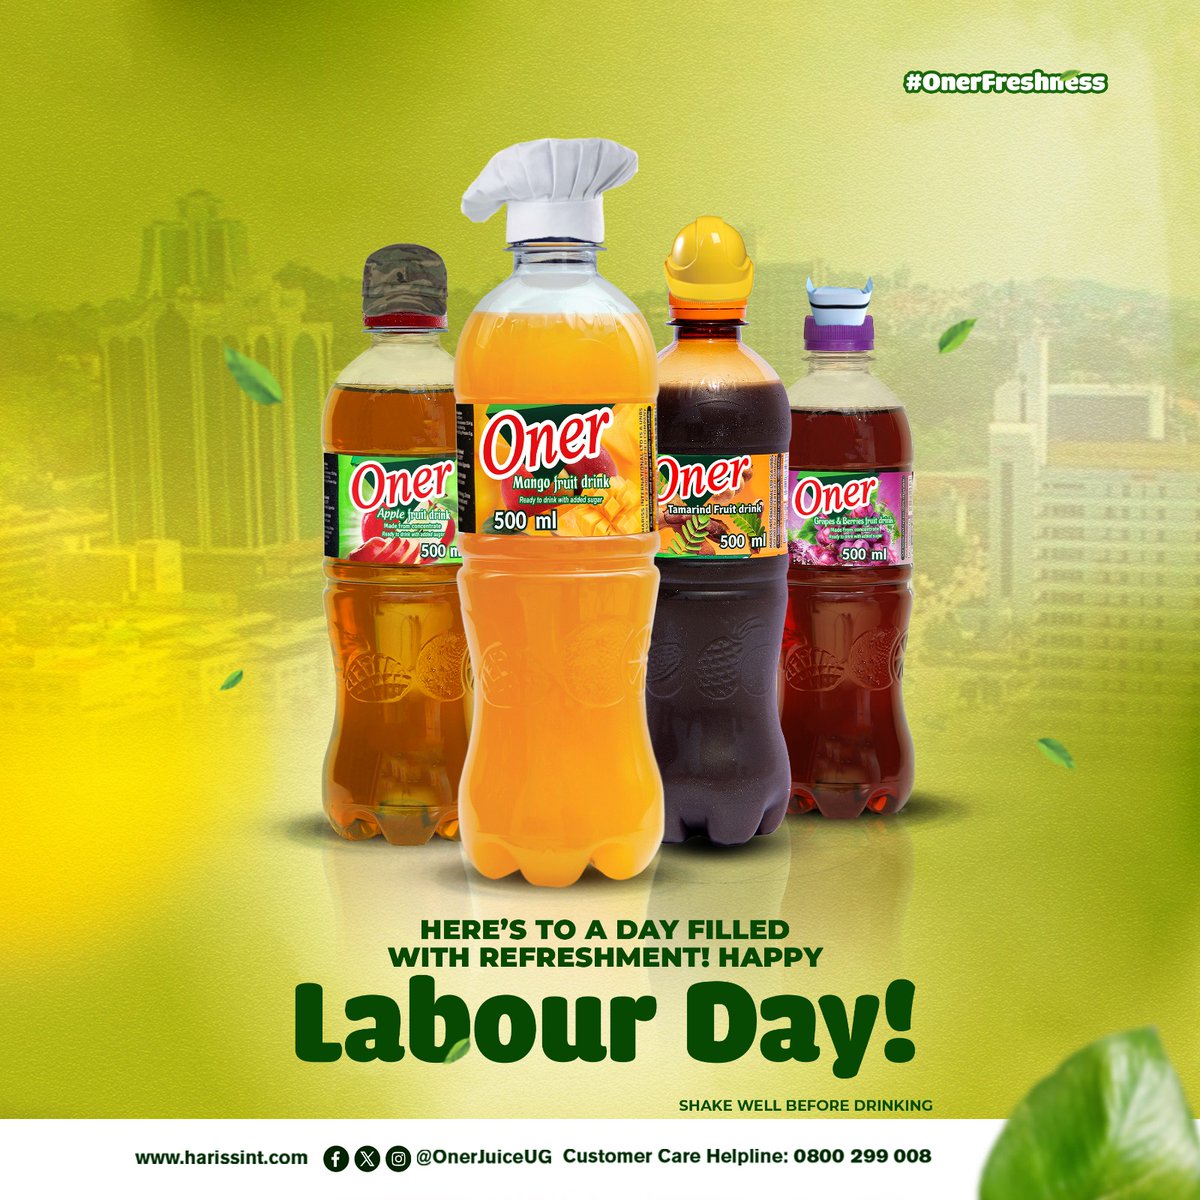 Cheers to a day brimming with refreshment! Happy Labour Day!